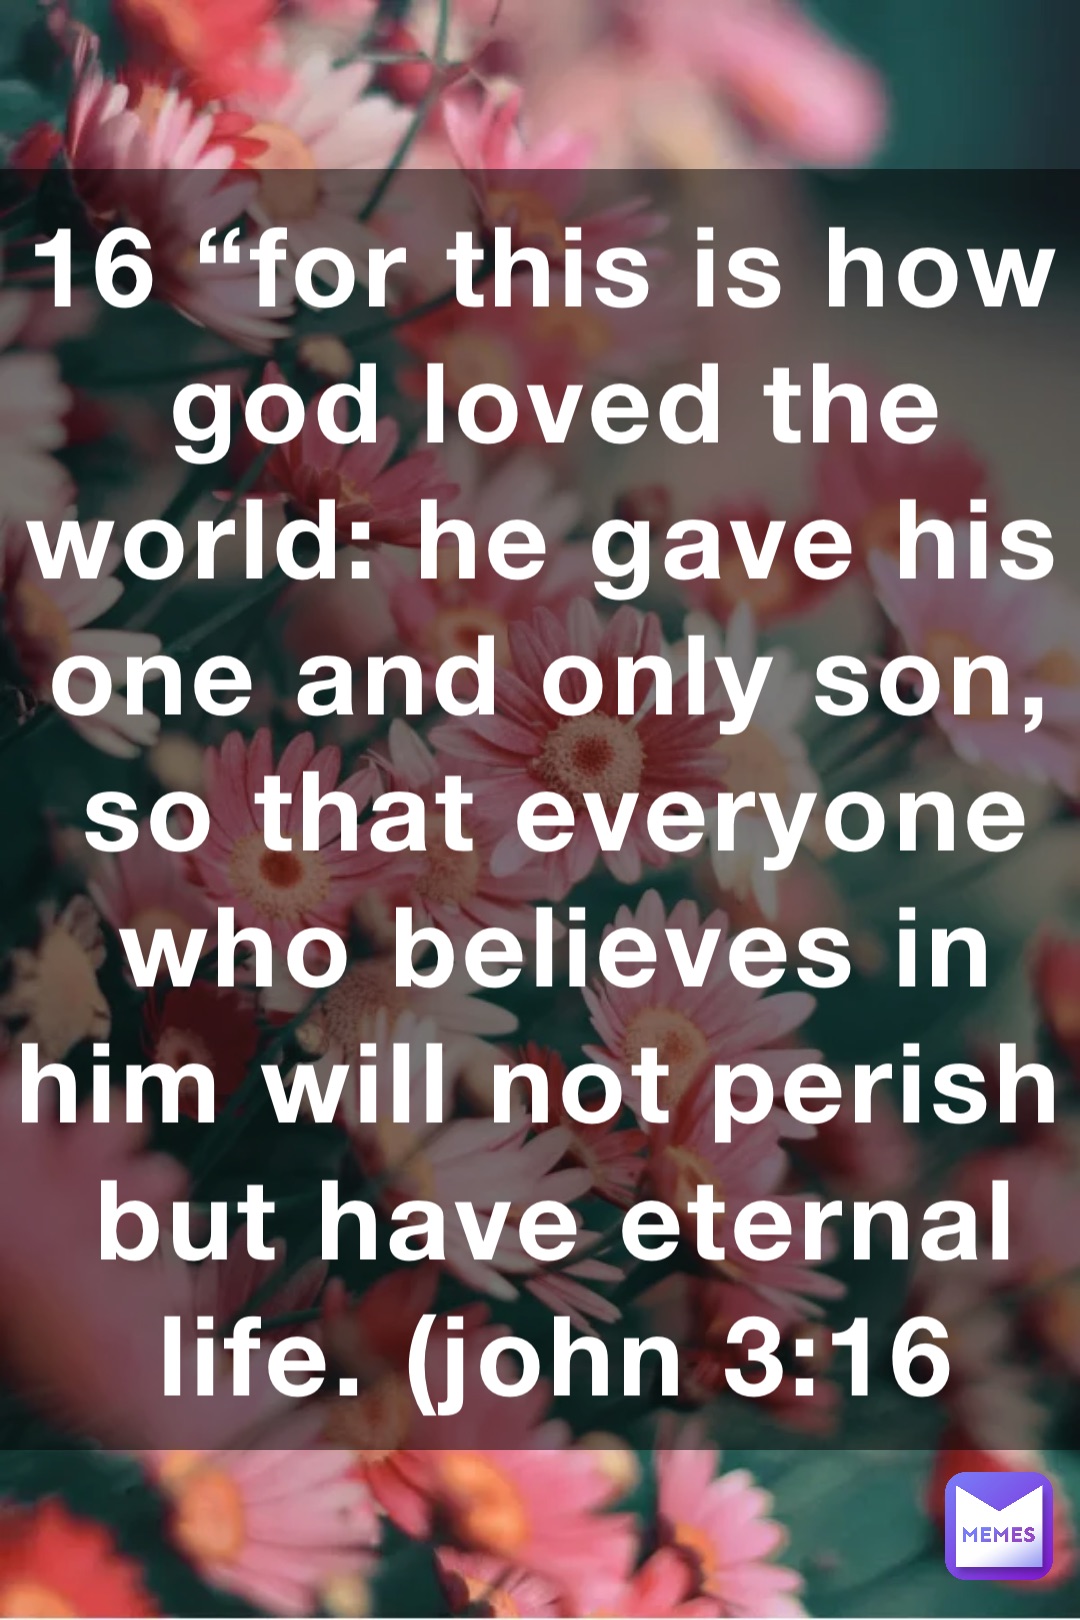 16 “For this is how God loved the world: He gave his one and only Son, so that everyone who believes in him will not perish but have eternal life. (‭‭‭John‬ ‭3‬‬:‭16‬ ‭NLT‬‬)